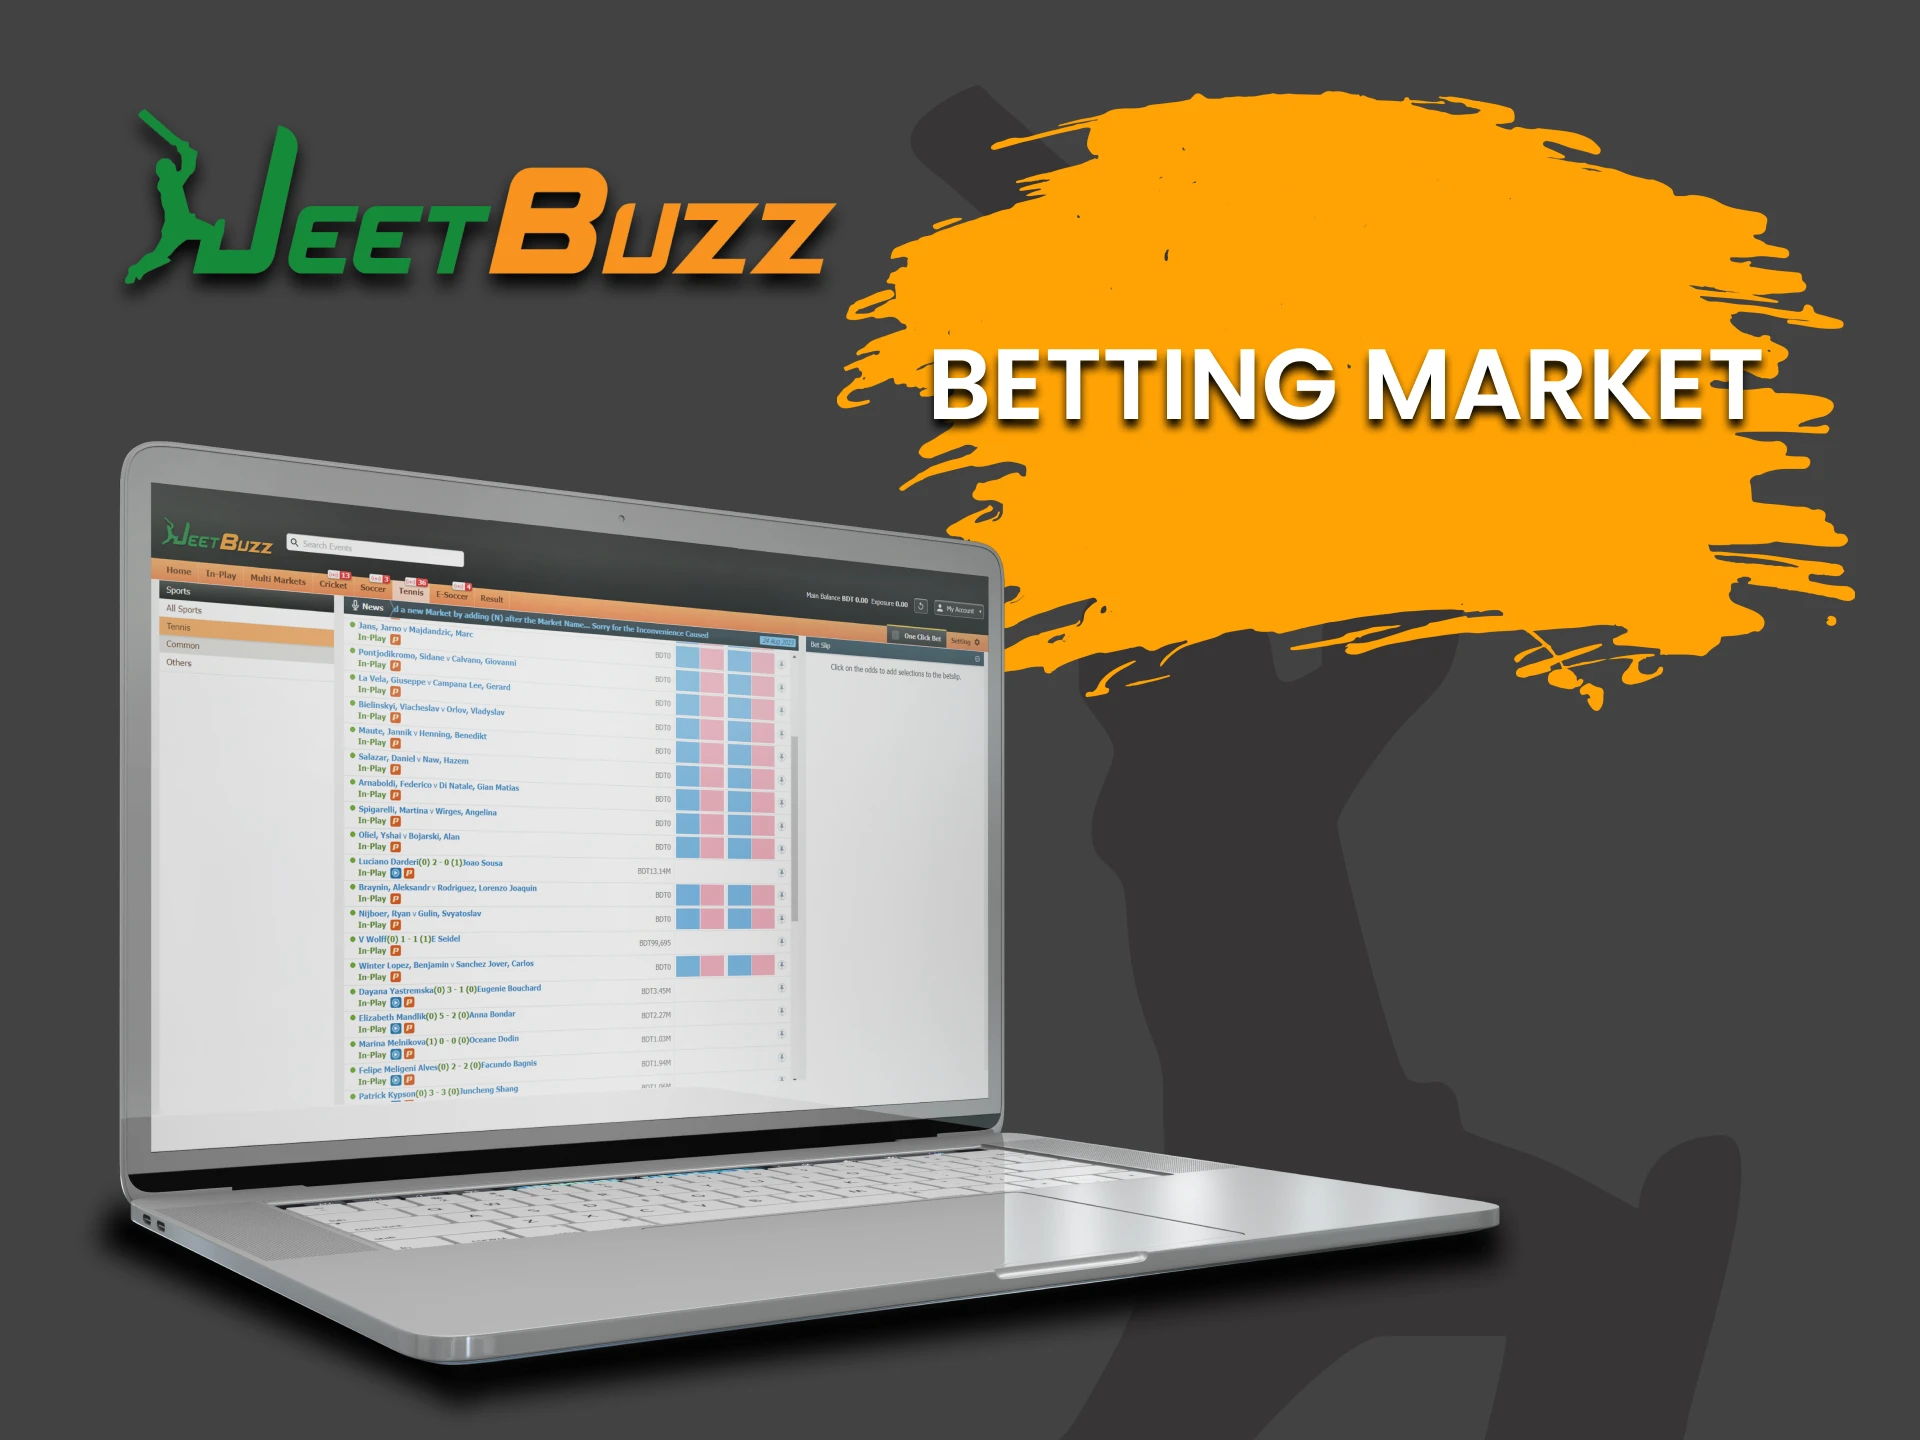 We will tell you in which markets you can bet on Tennis from JeetBuzz.